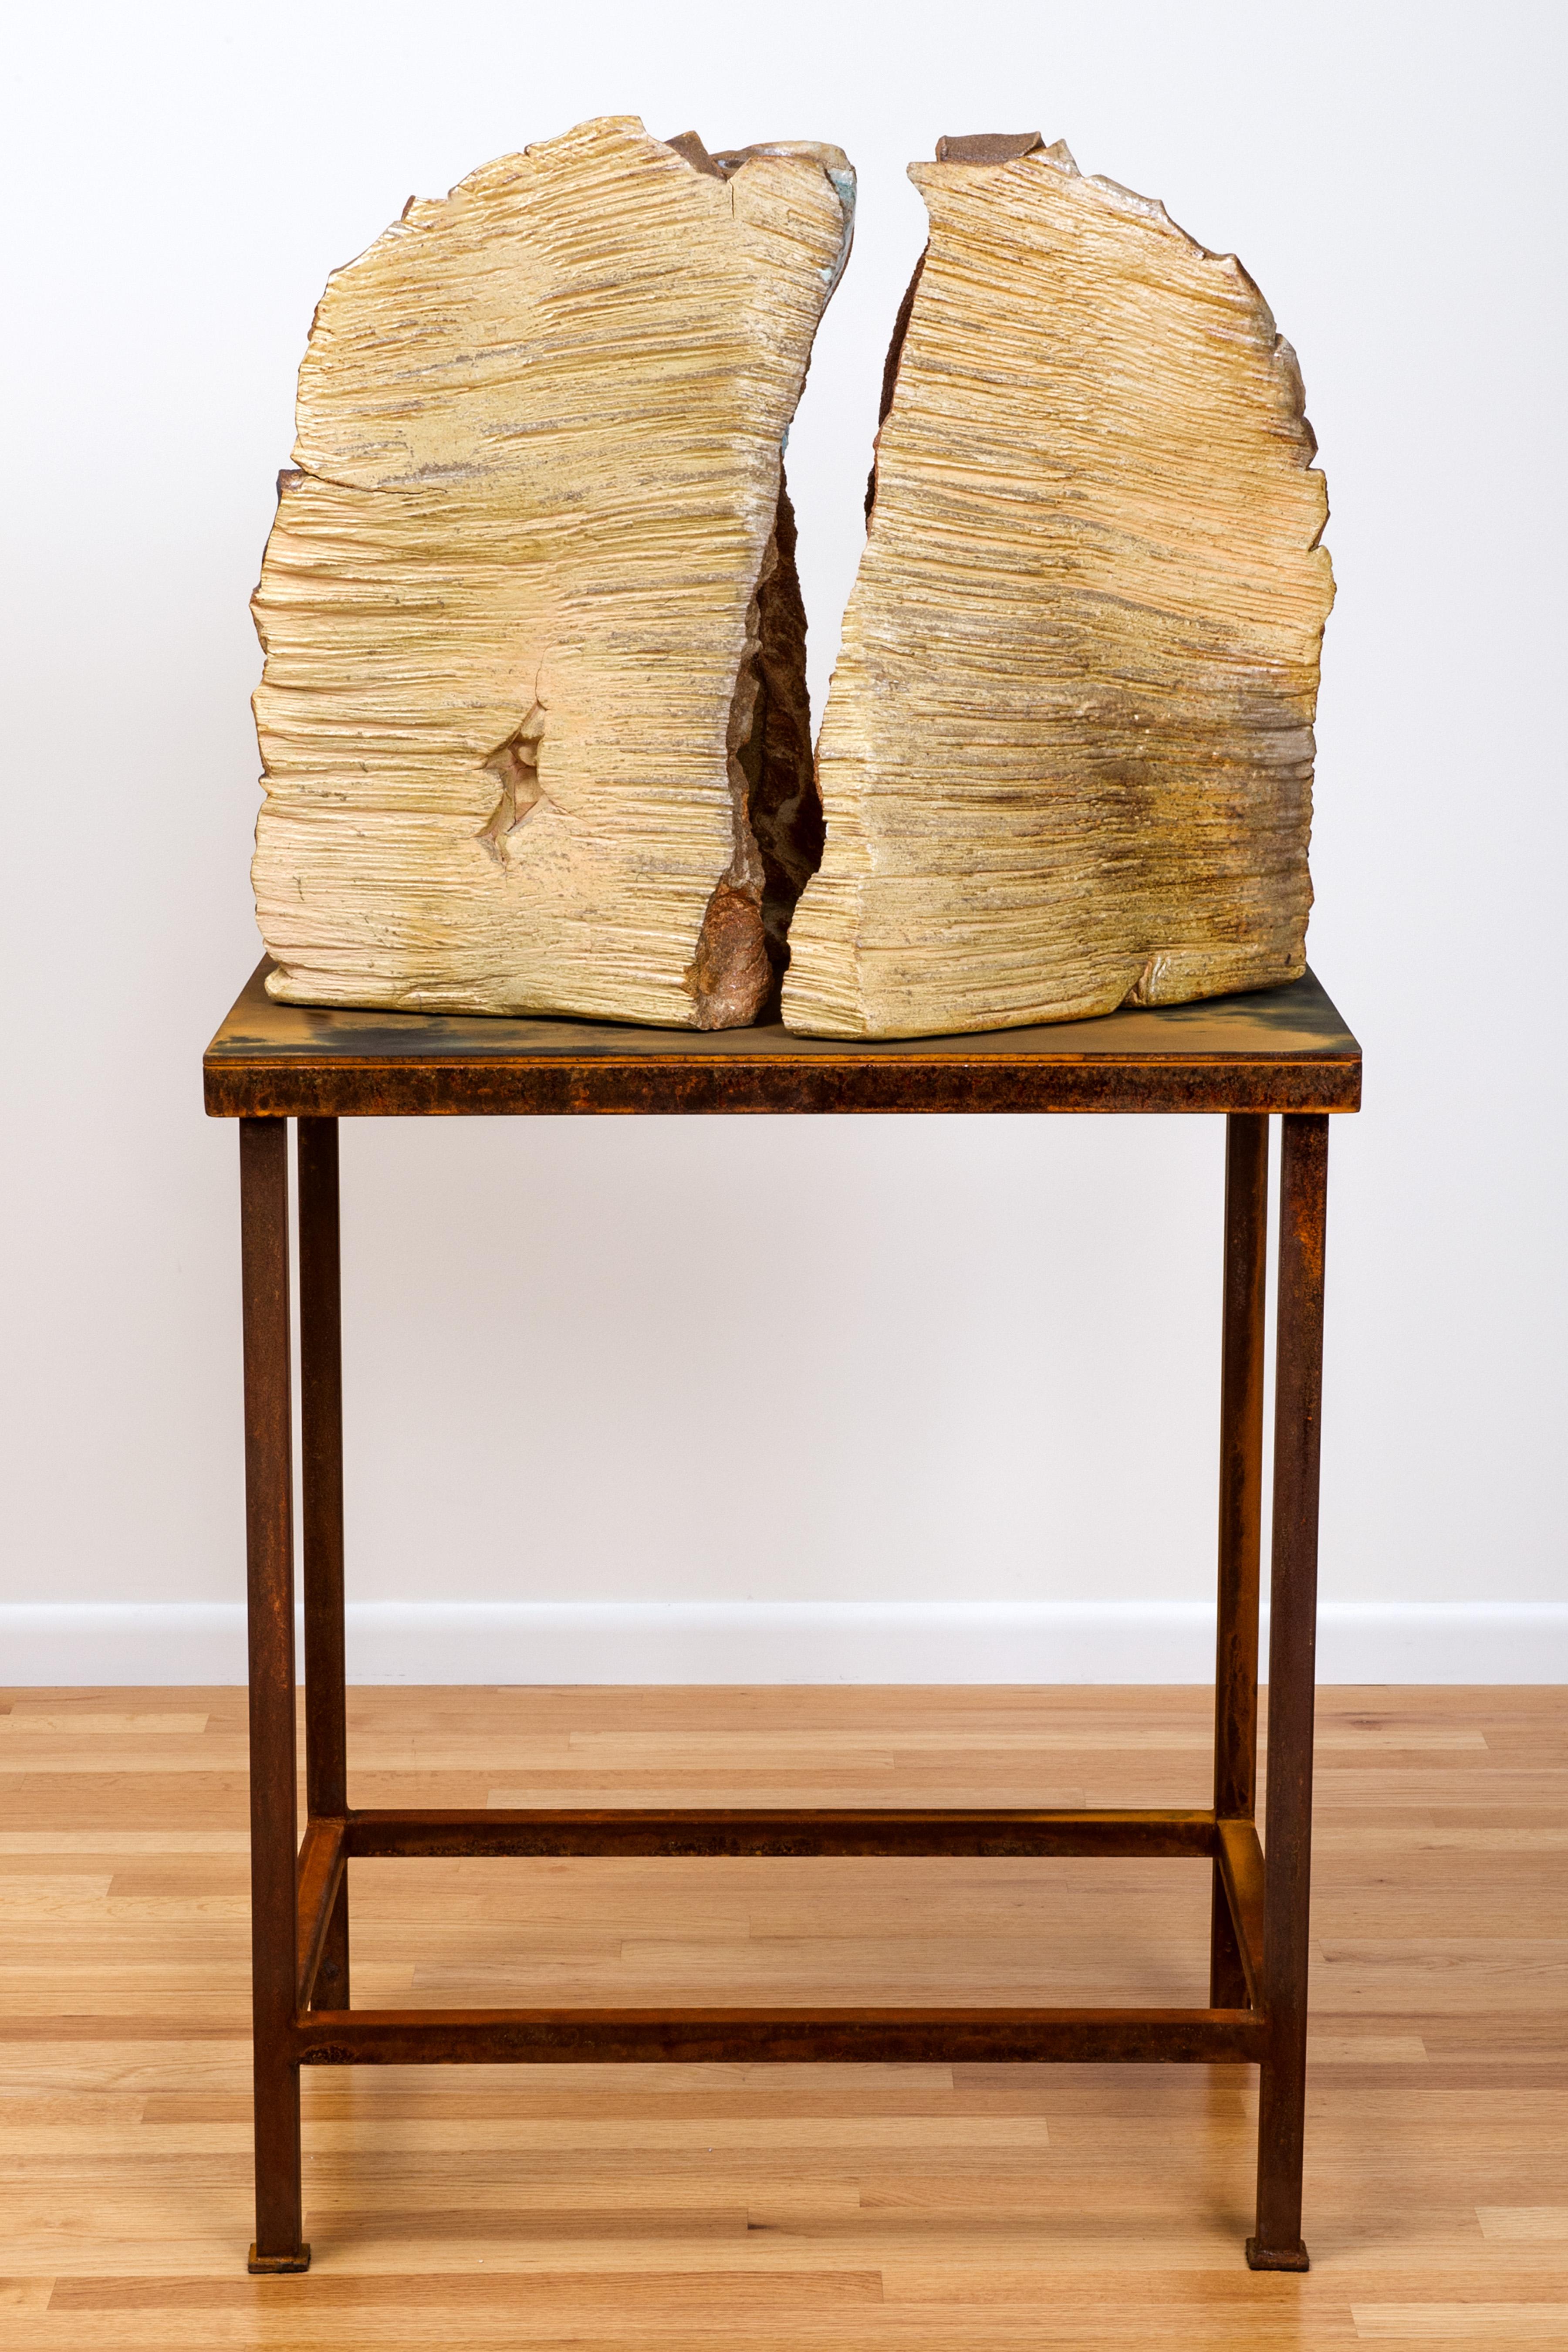 Tony Moore Abstract Sculpture - Large scale wood-fired ceramic sculpture: 'Voice '